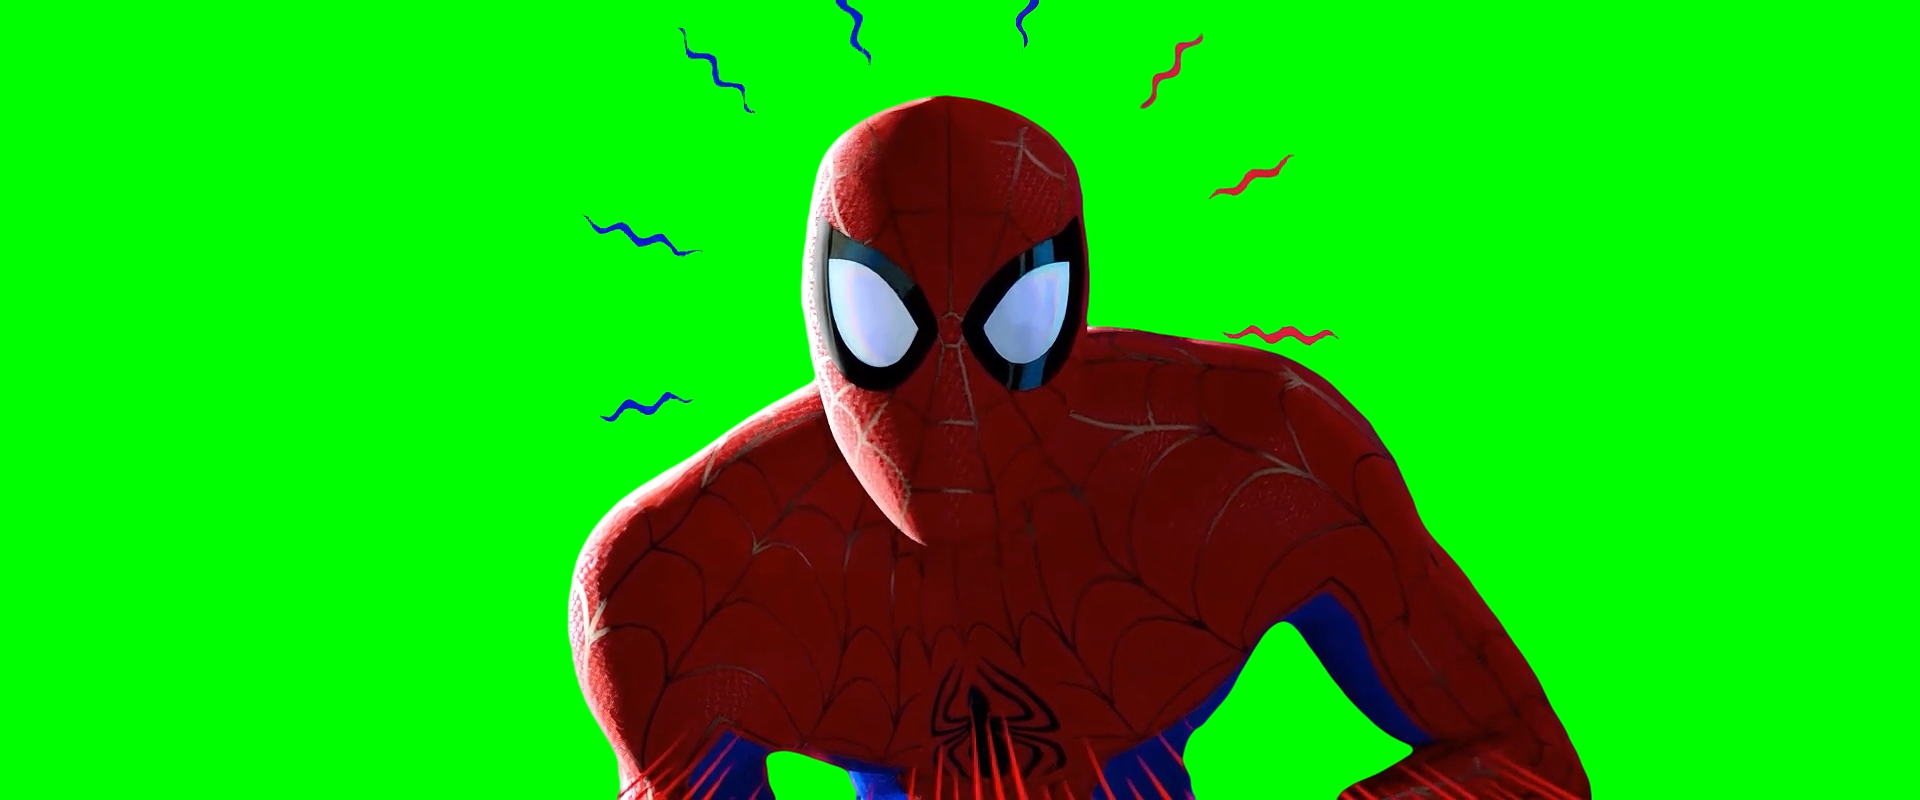 Miles Morales meets Spider-Man meme - Spider-Man: Into the Spider-Verse (Green Screen)